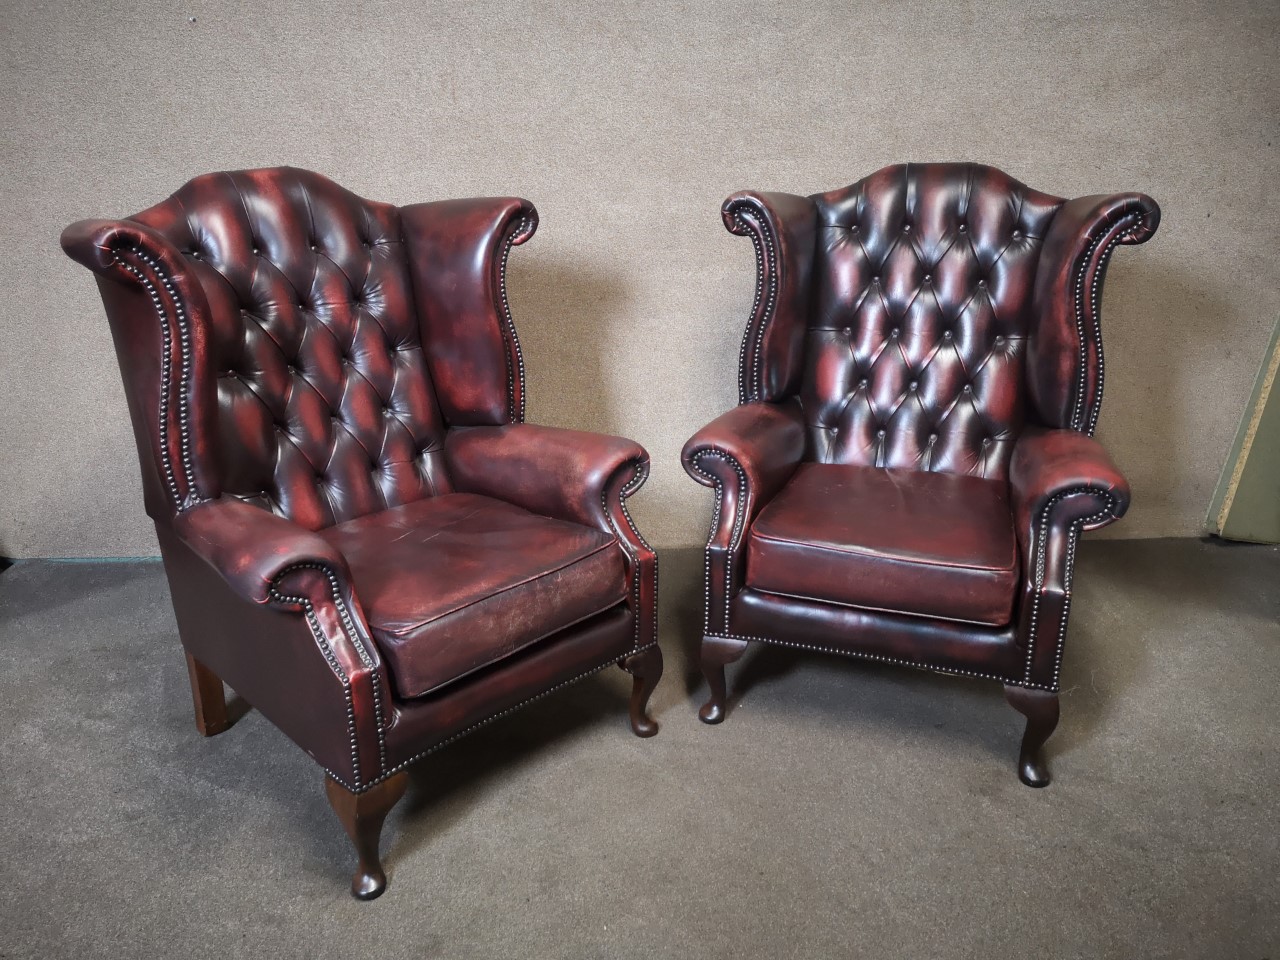 Chesterfield suite  1) Pair of Queen Anne chairs画像